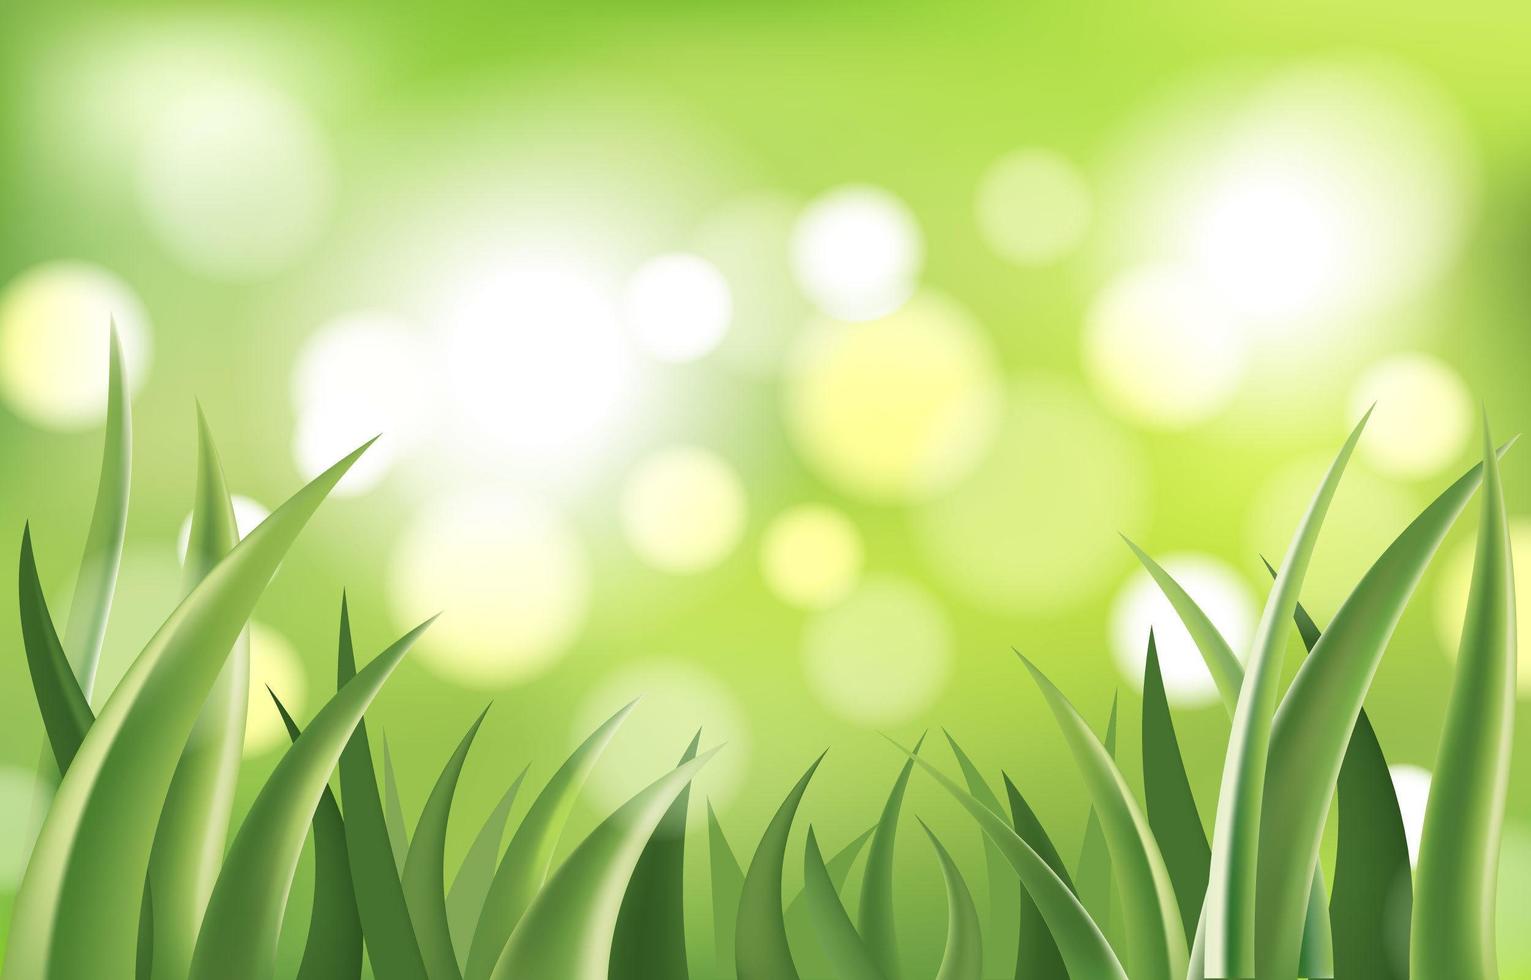 Abstract Green Grass in Bokeh Background vector